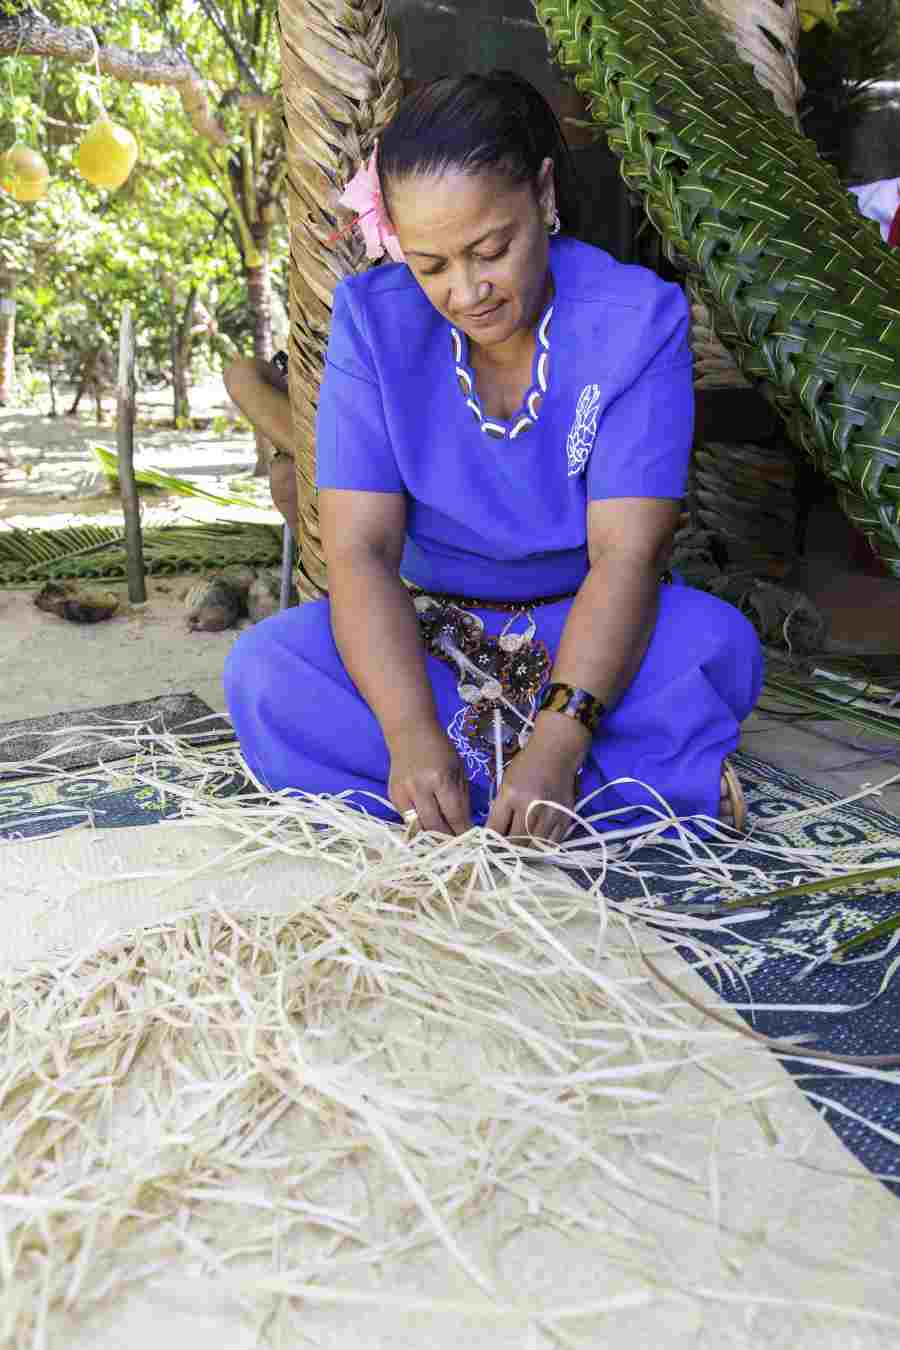 10 Best Ways to Experience the Tongan Culture